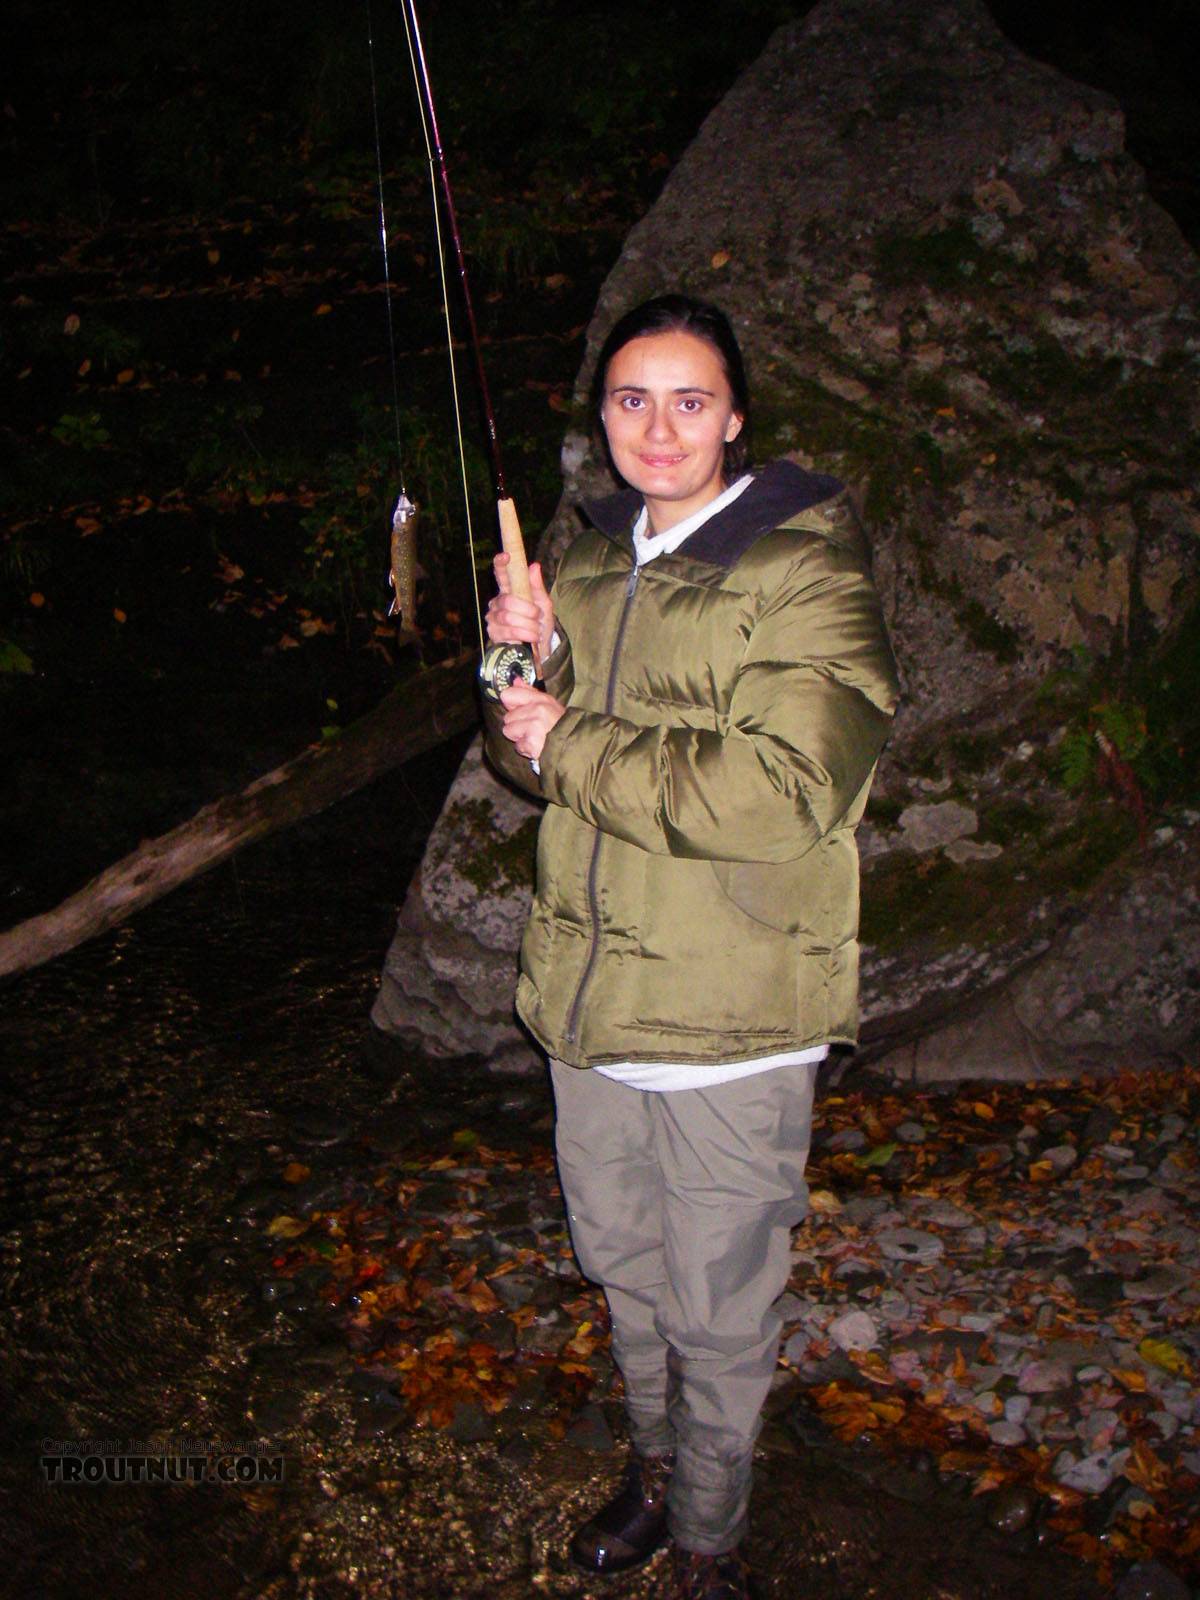 Lena's first trout on the fly -- a heavily colored male brookie of a respectable size for his tiny stream.  I left her with the rod and a nymph and walked downstream to man the camera, then I turned around and she was waving this trout around in the air.  A pleasant surprise! From Mystery Creek # 89 in New York.